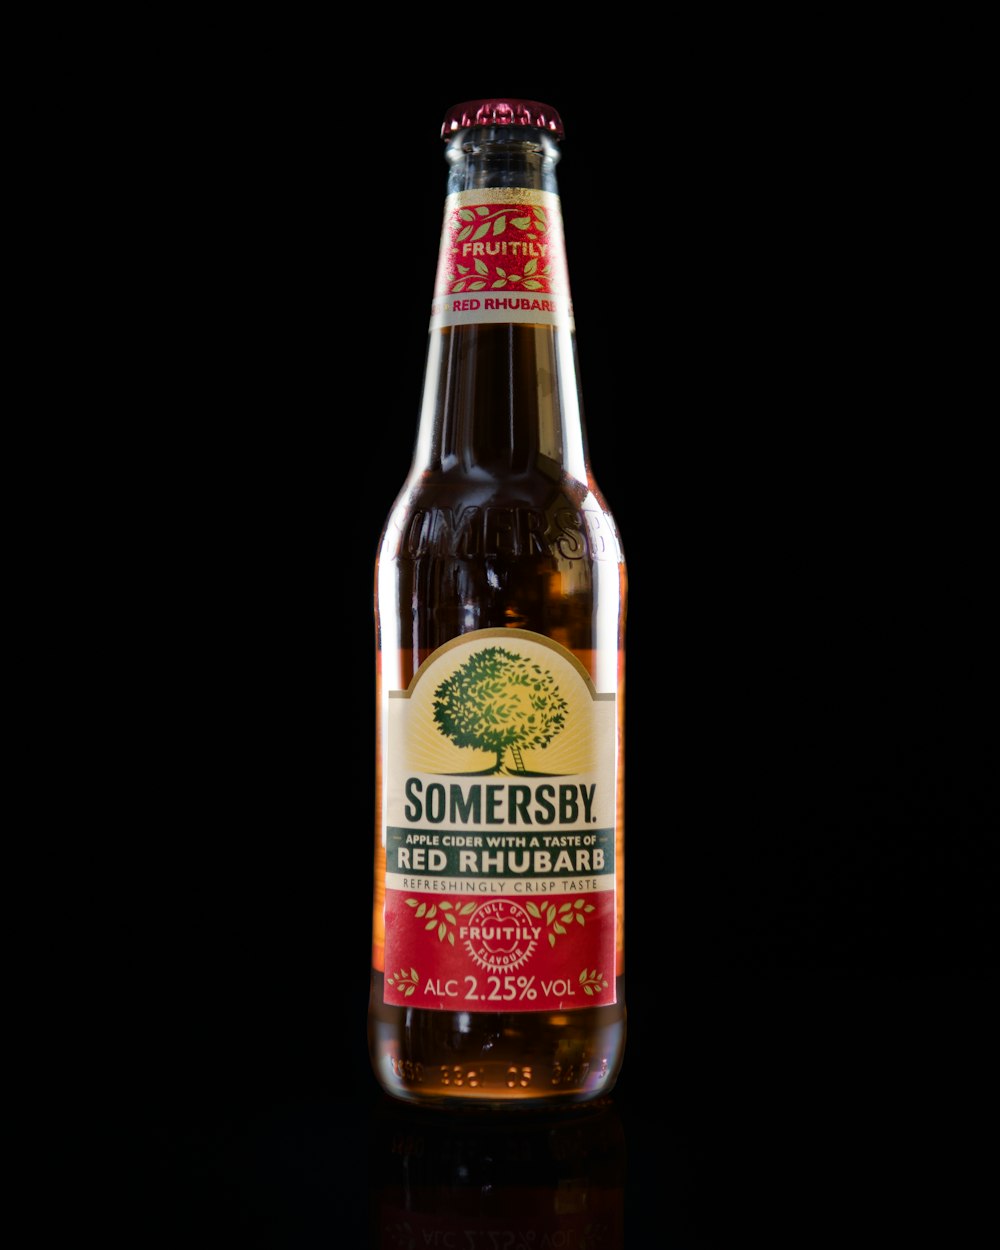 Somersby glass bottle